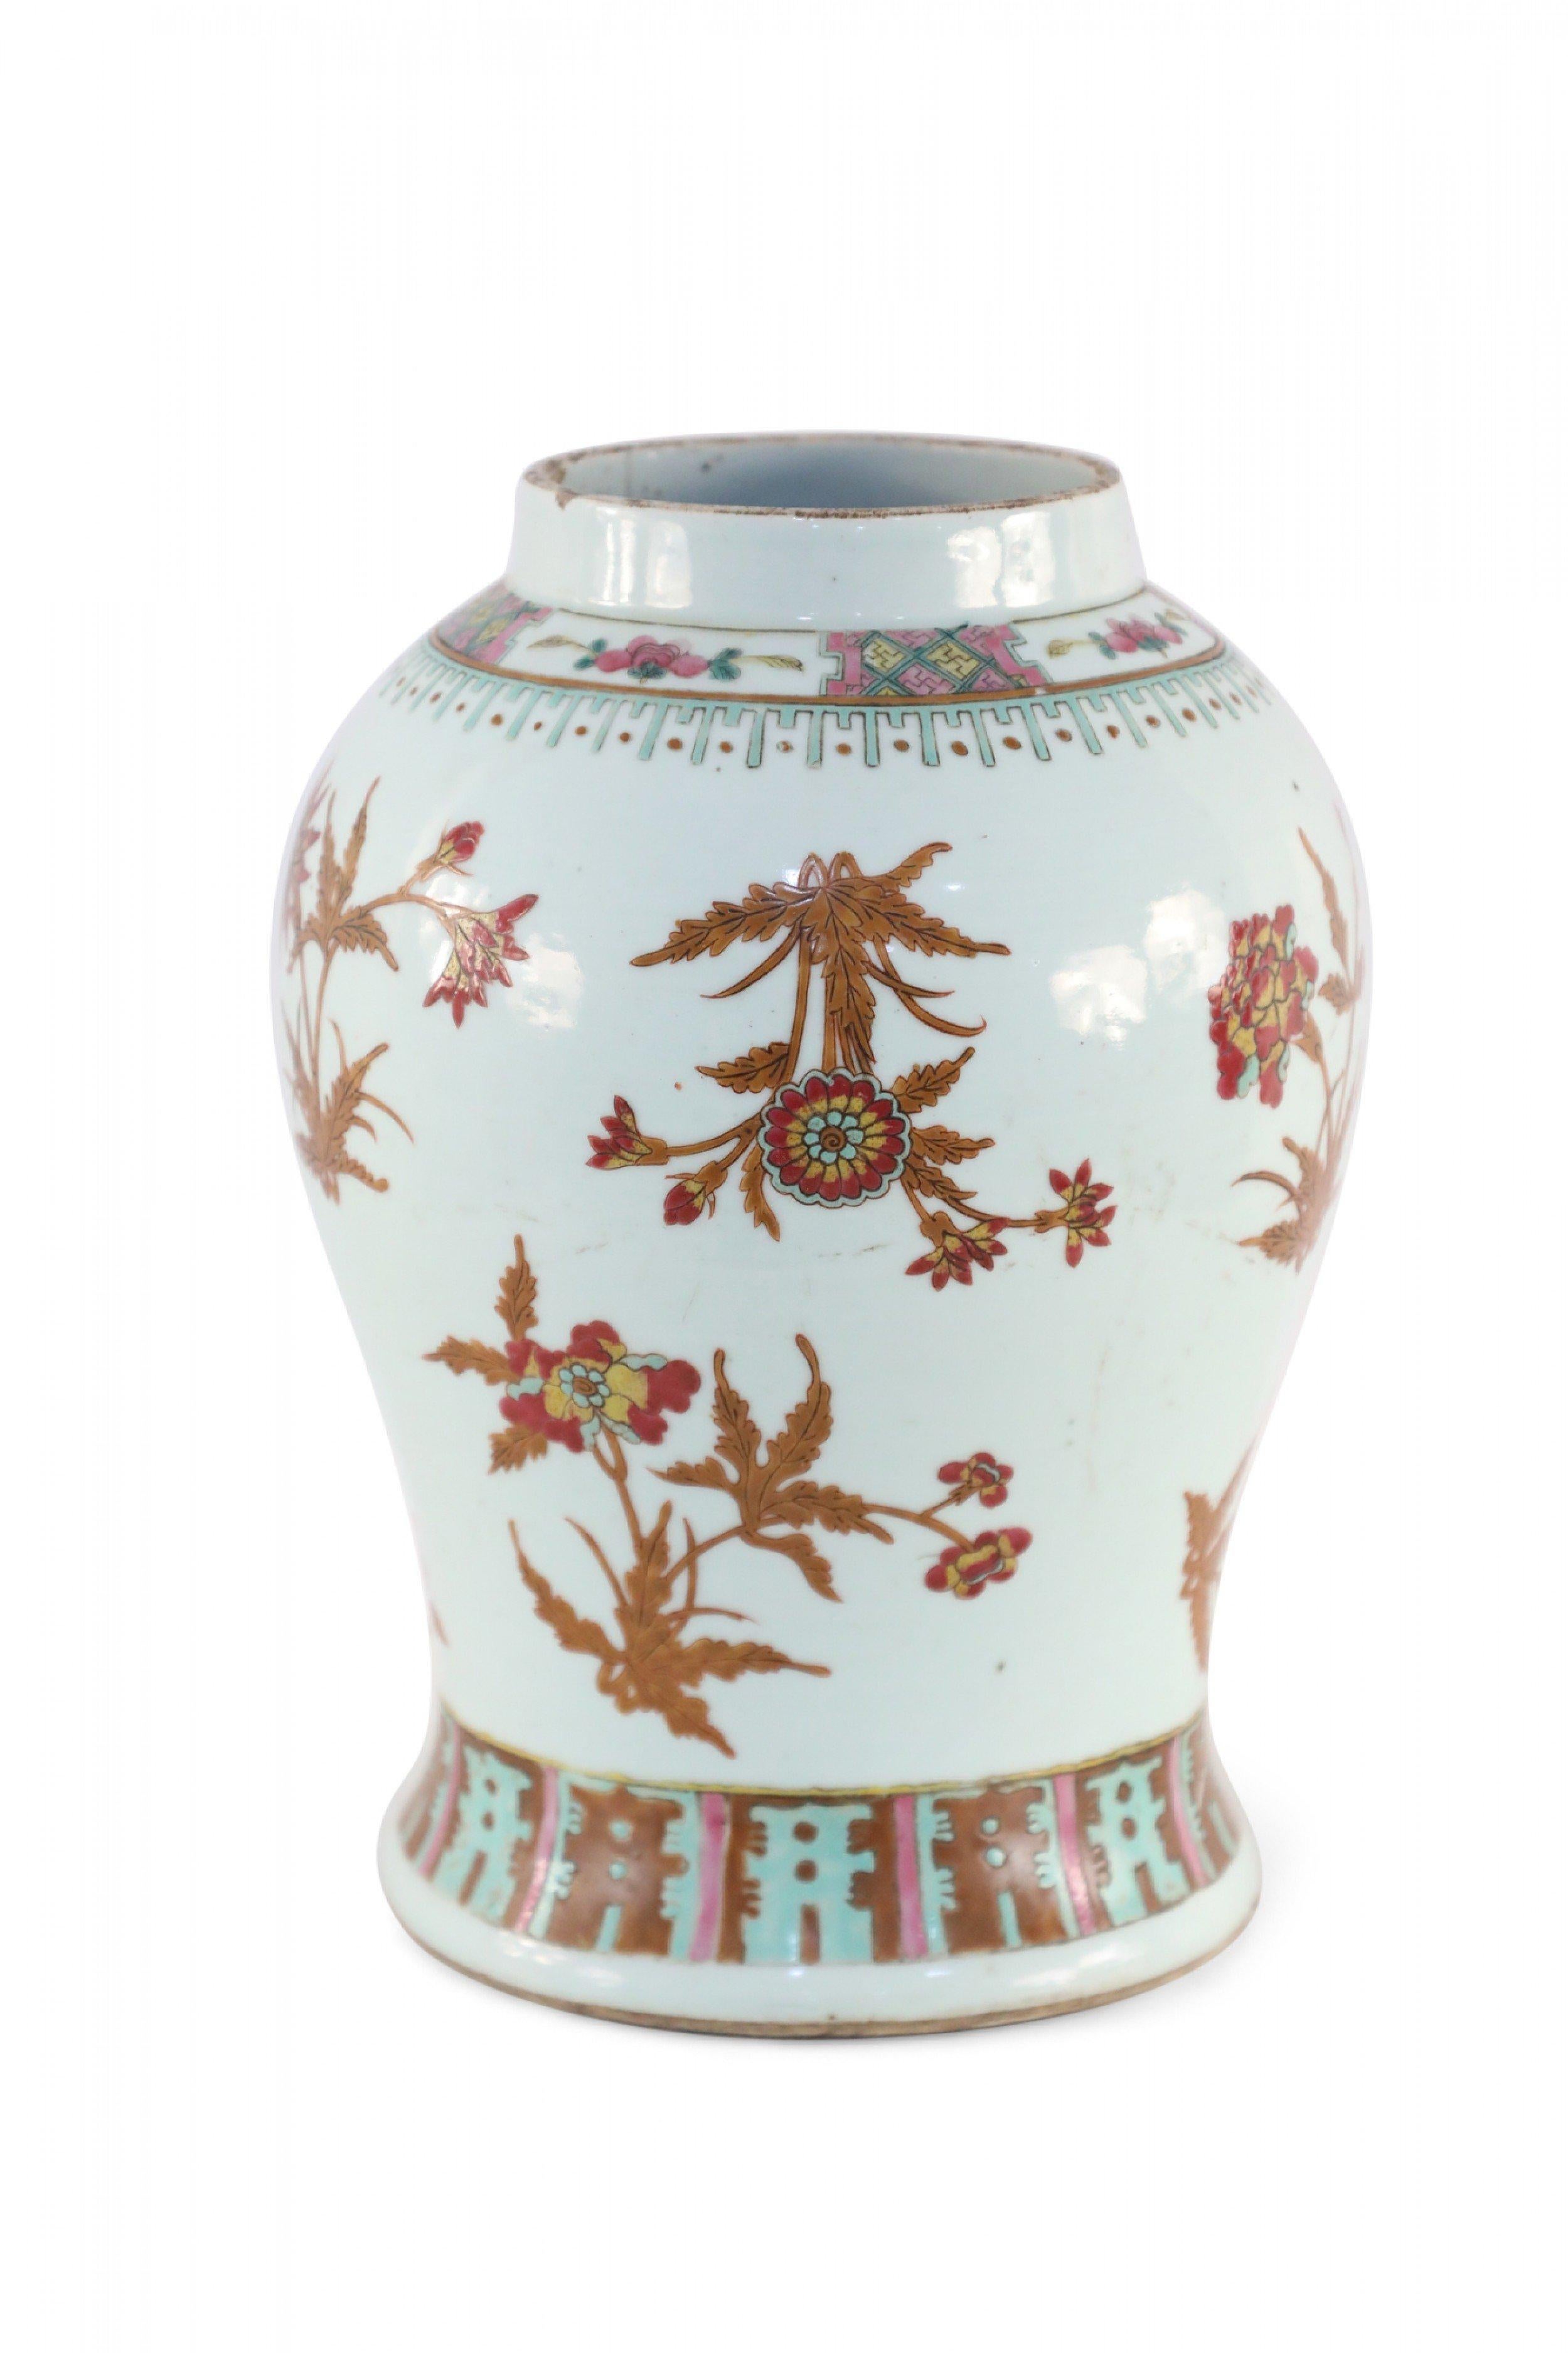 Chinese white porcelain vase decorated with incised and painted brown foliage and stems growing blooming red florals, and wrapped in geometric bands of blue, pink and yellow at the opening and base.
 